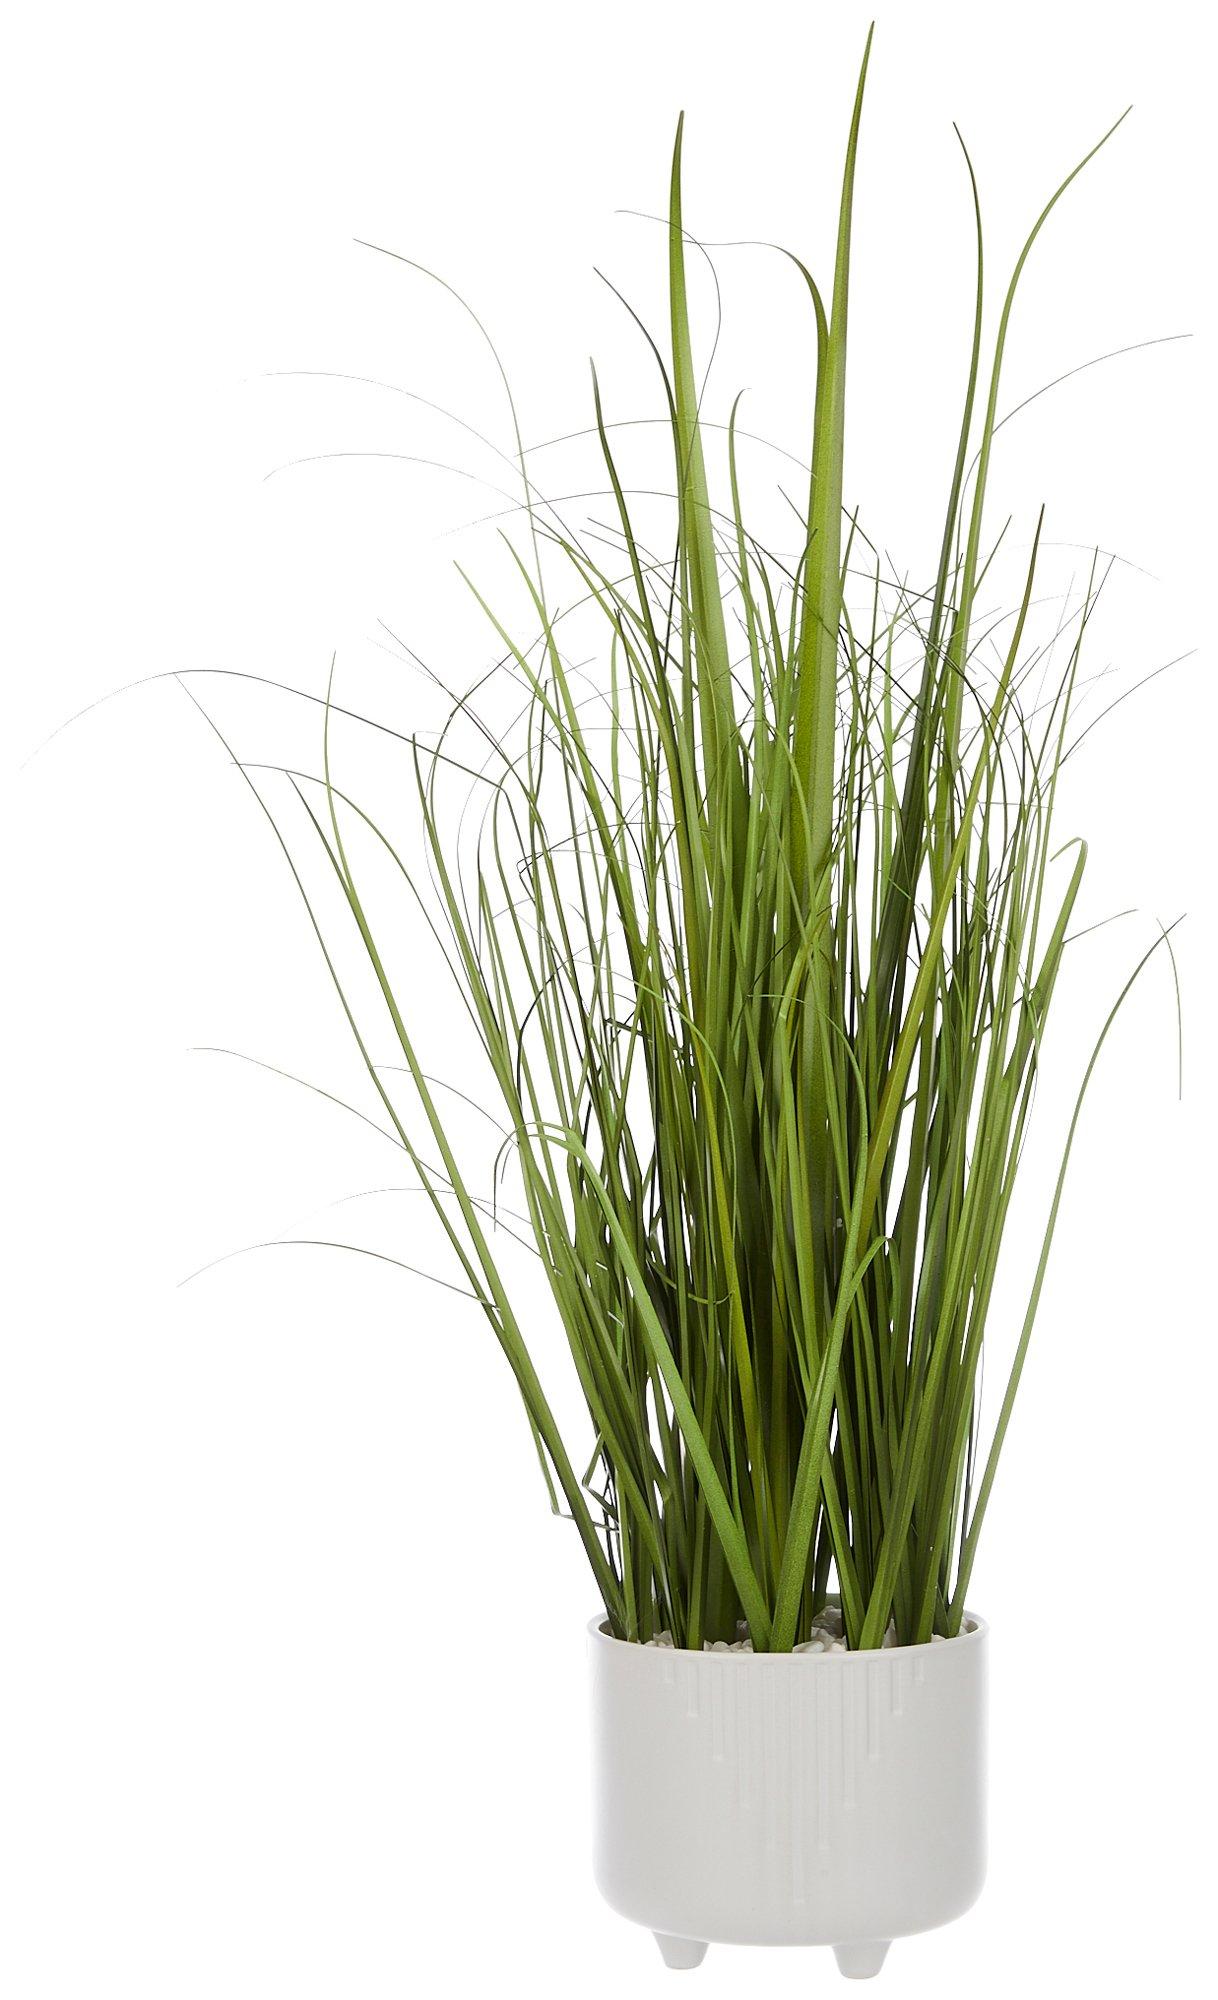 27in Onion Grass Potted Plant Decor